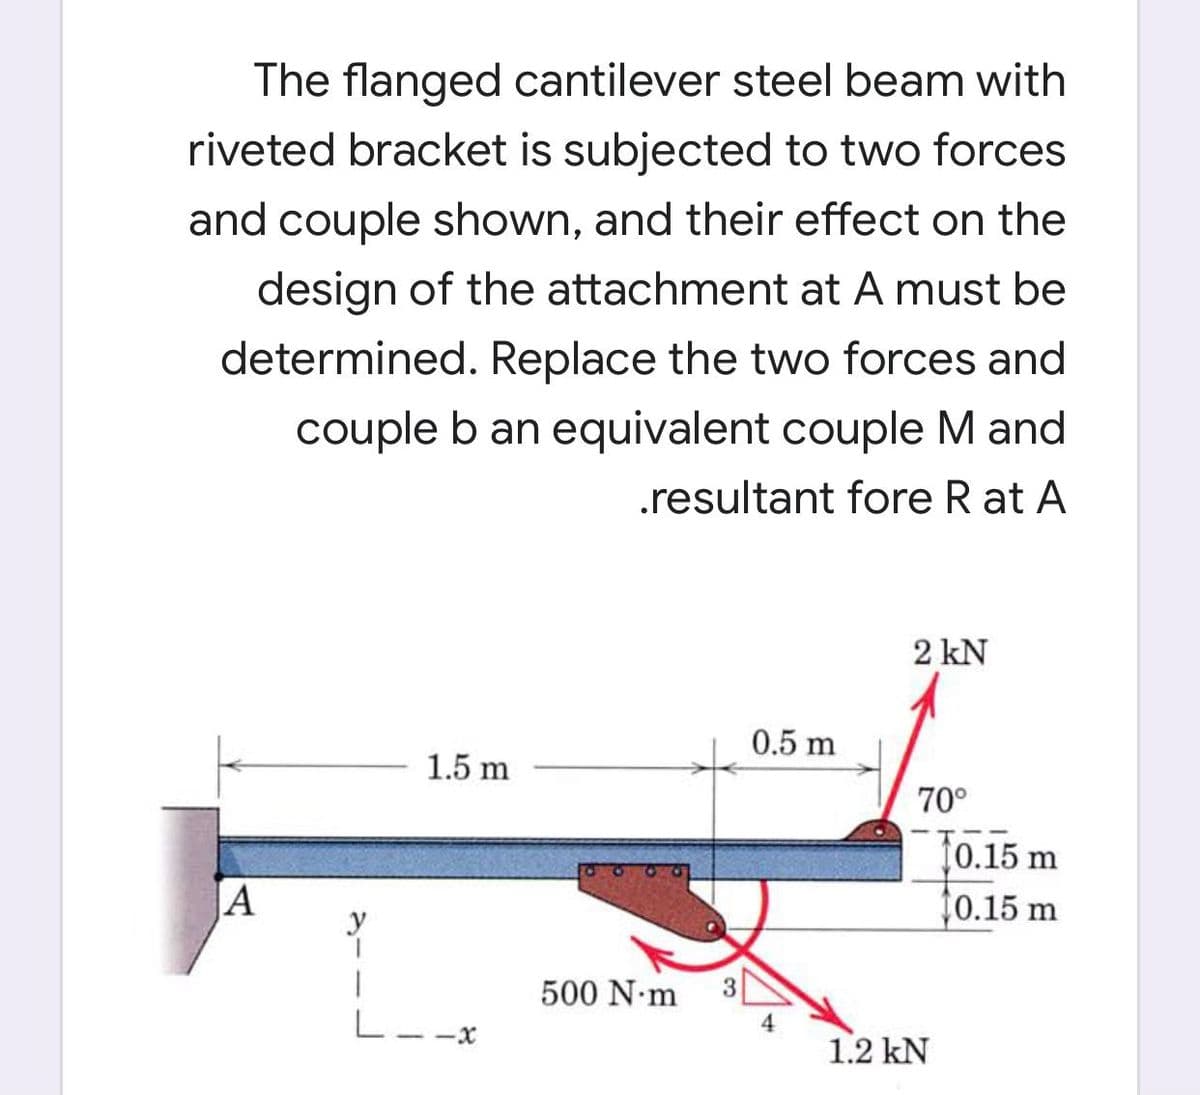 The flanged cantilever steel beam with
riveted bracket is subjected to two forces
and couple shown, and their effect on the
design of the attachment at A must be
determined. Replace the two forces and
couple b an equivalent couple M and
.resultant fore R at A
2 kN
0.5 m
1.5 m
70°
10.15 m
JA
0.15 m
500 N m
1.2 kN
